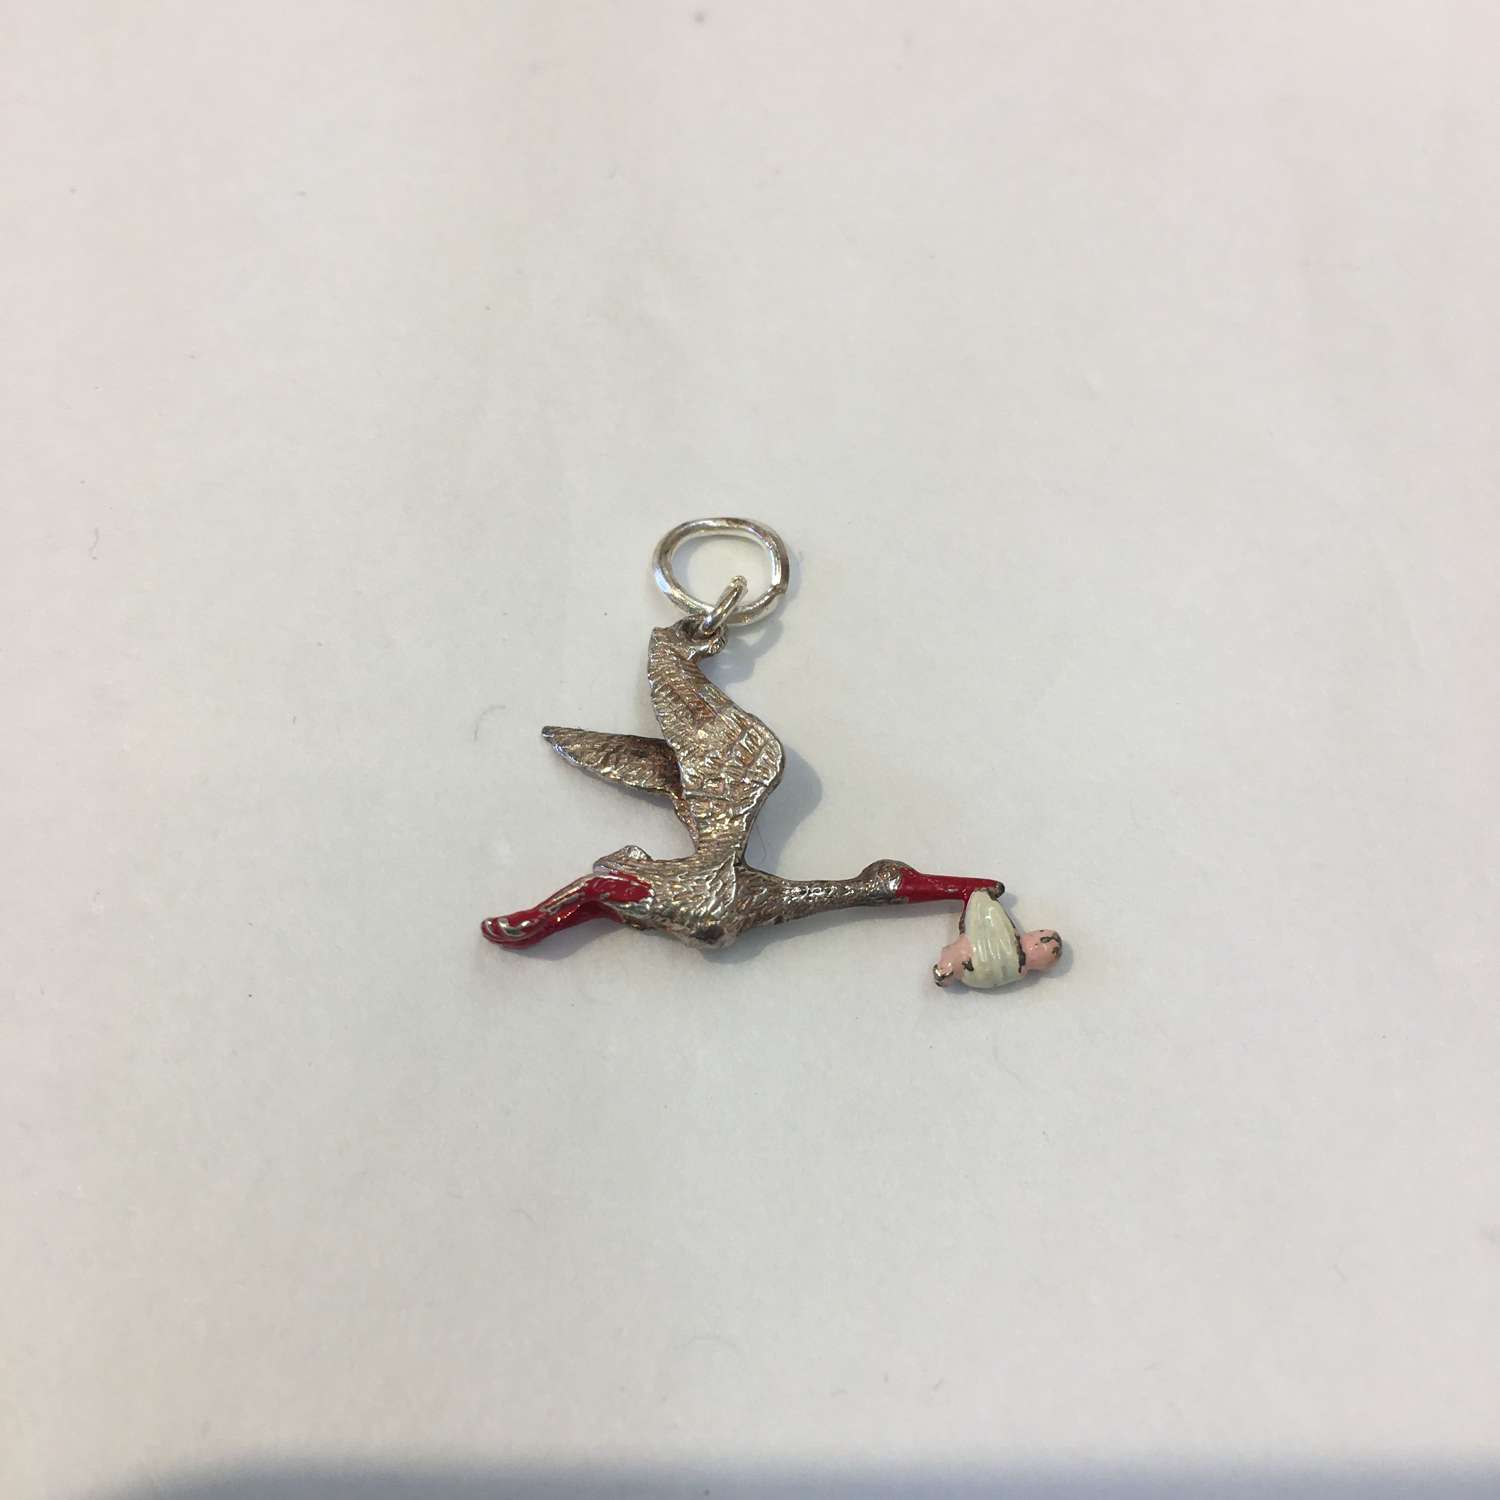 Vintage silver and enamel stork and baby charm